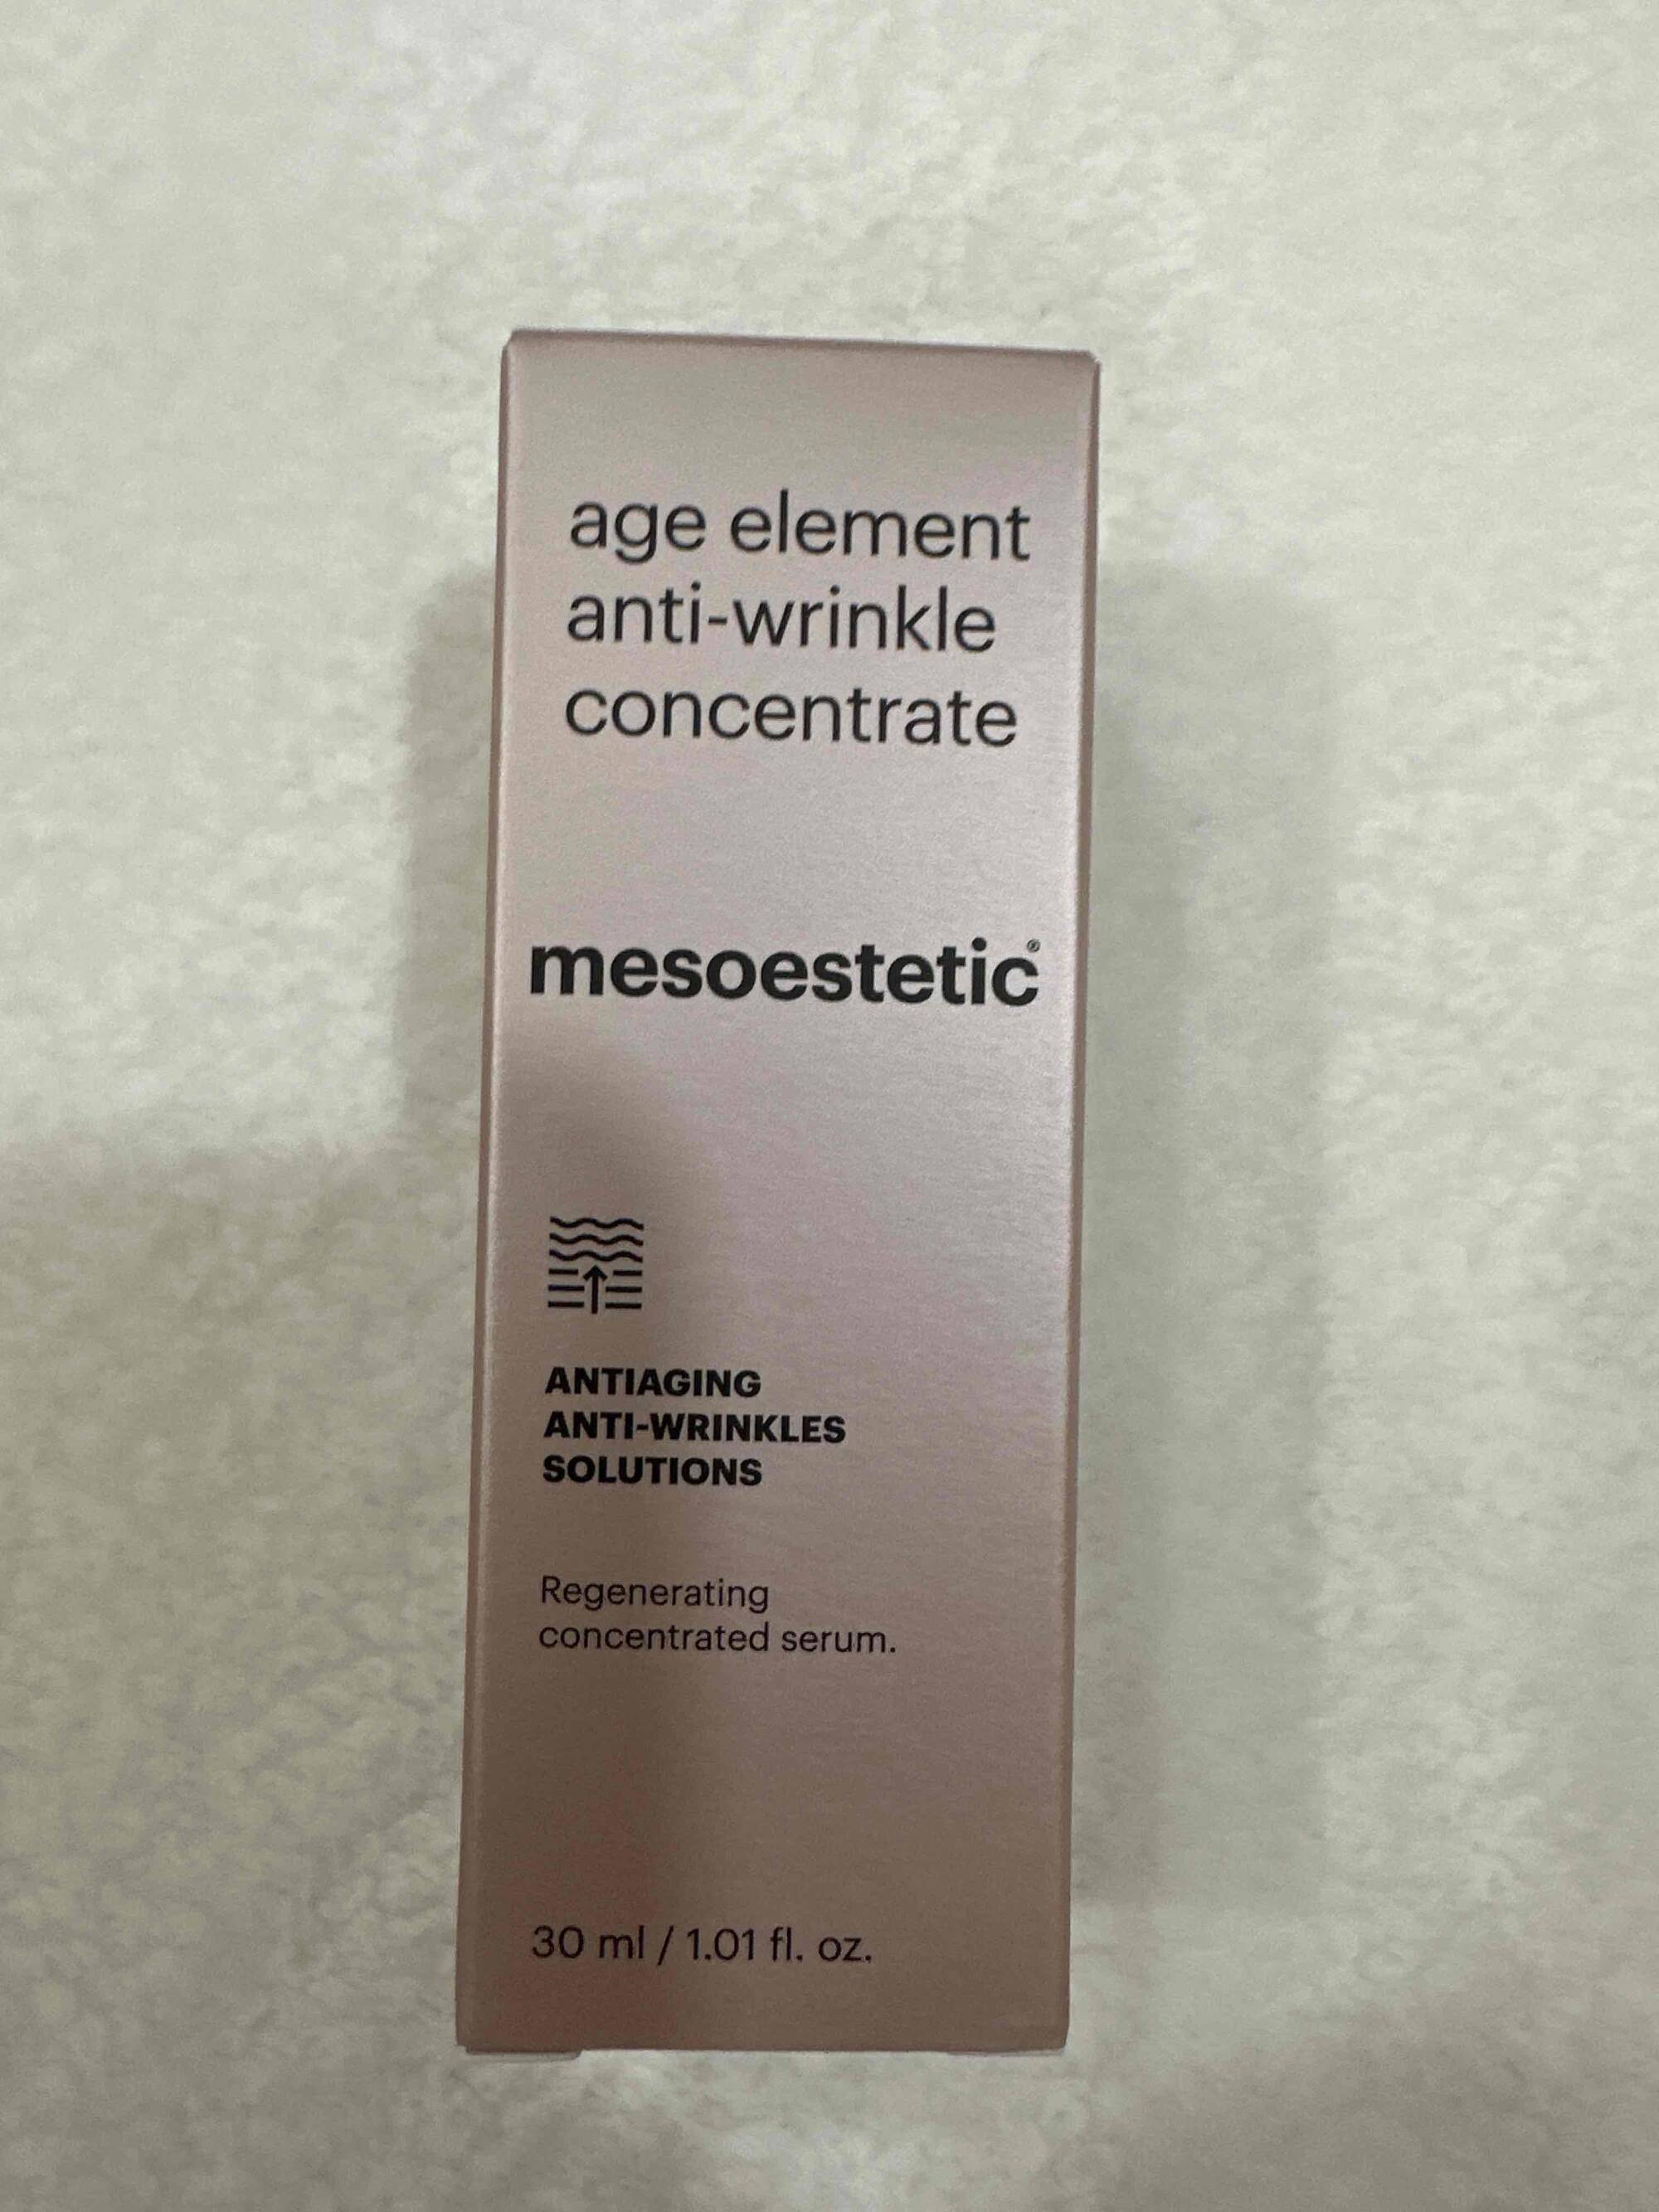 MESOESTETIC - Age element anti-wrinkle concentrate